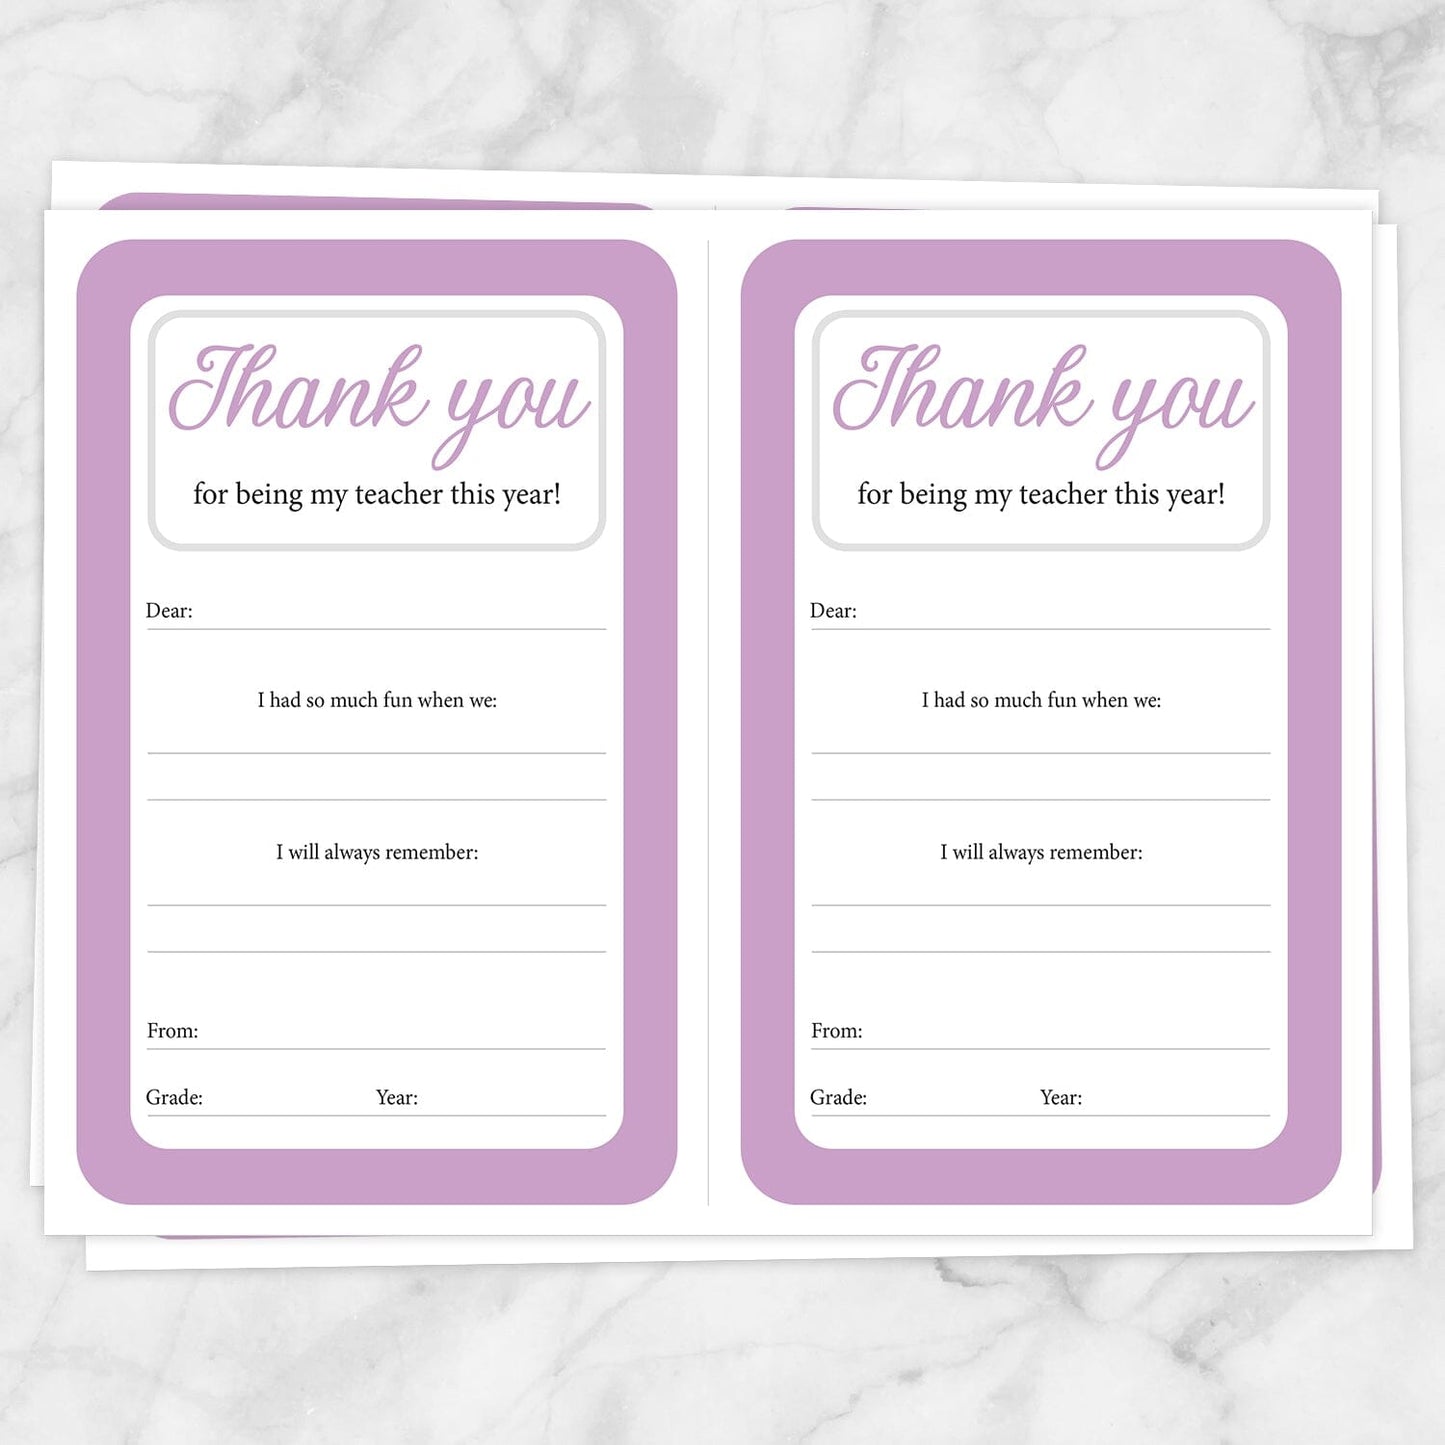 Printable Teacher Thank You Notes in purple at Printable Planning. Sheets of 2 thank you notes per page.